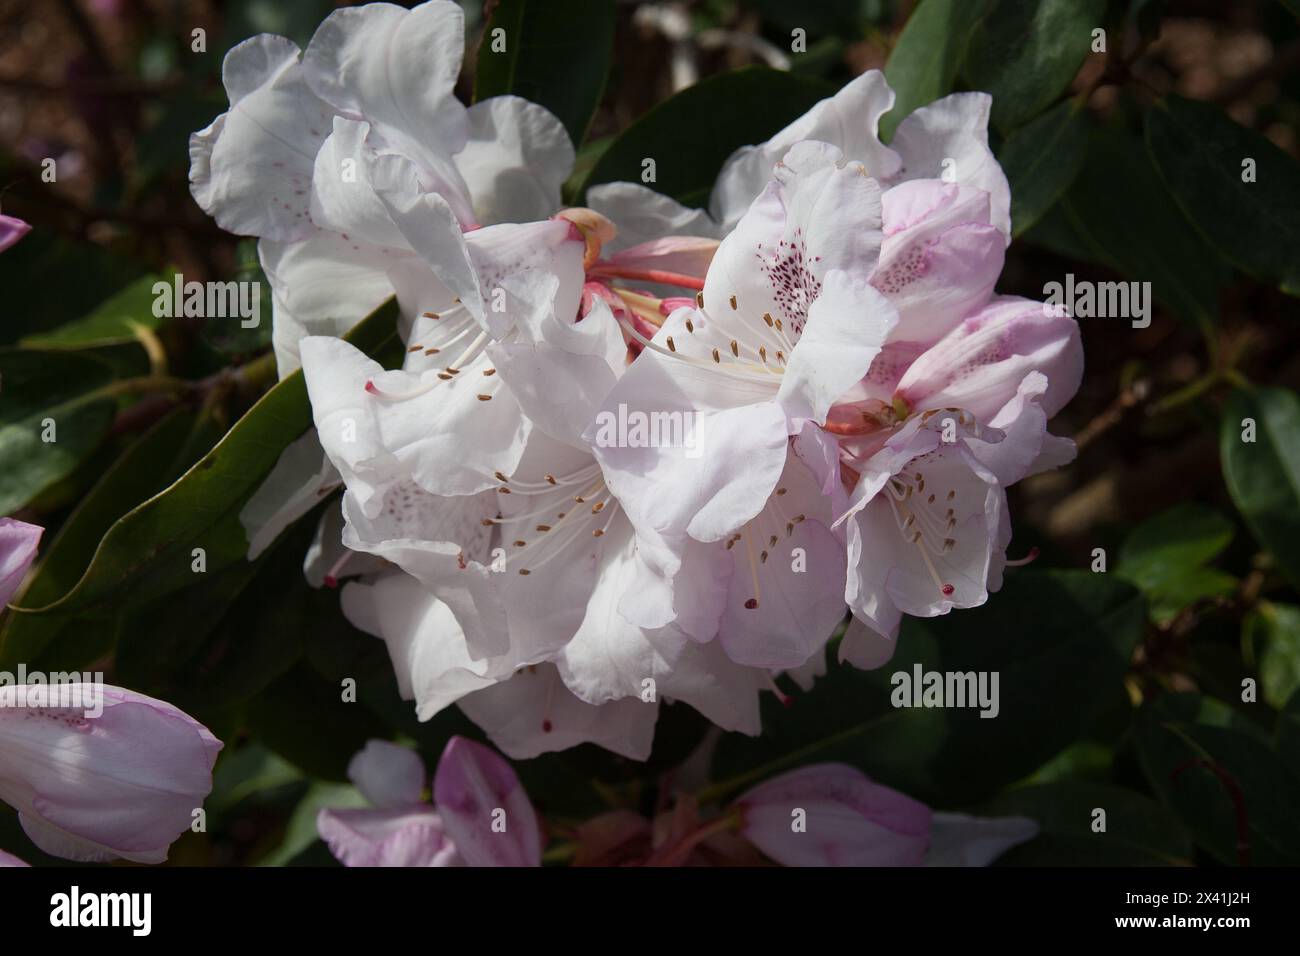 Spring rhododendrons flowers Stock Photo